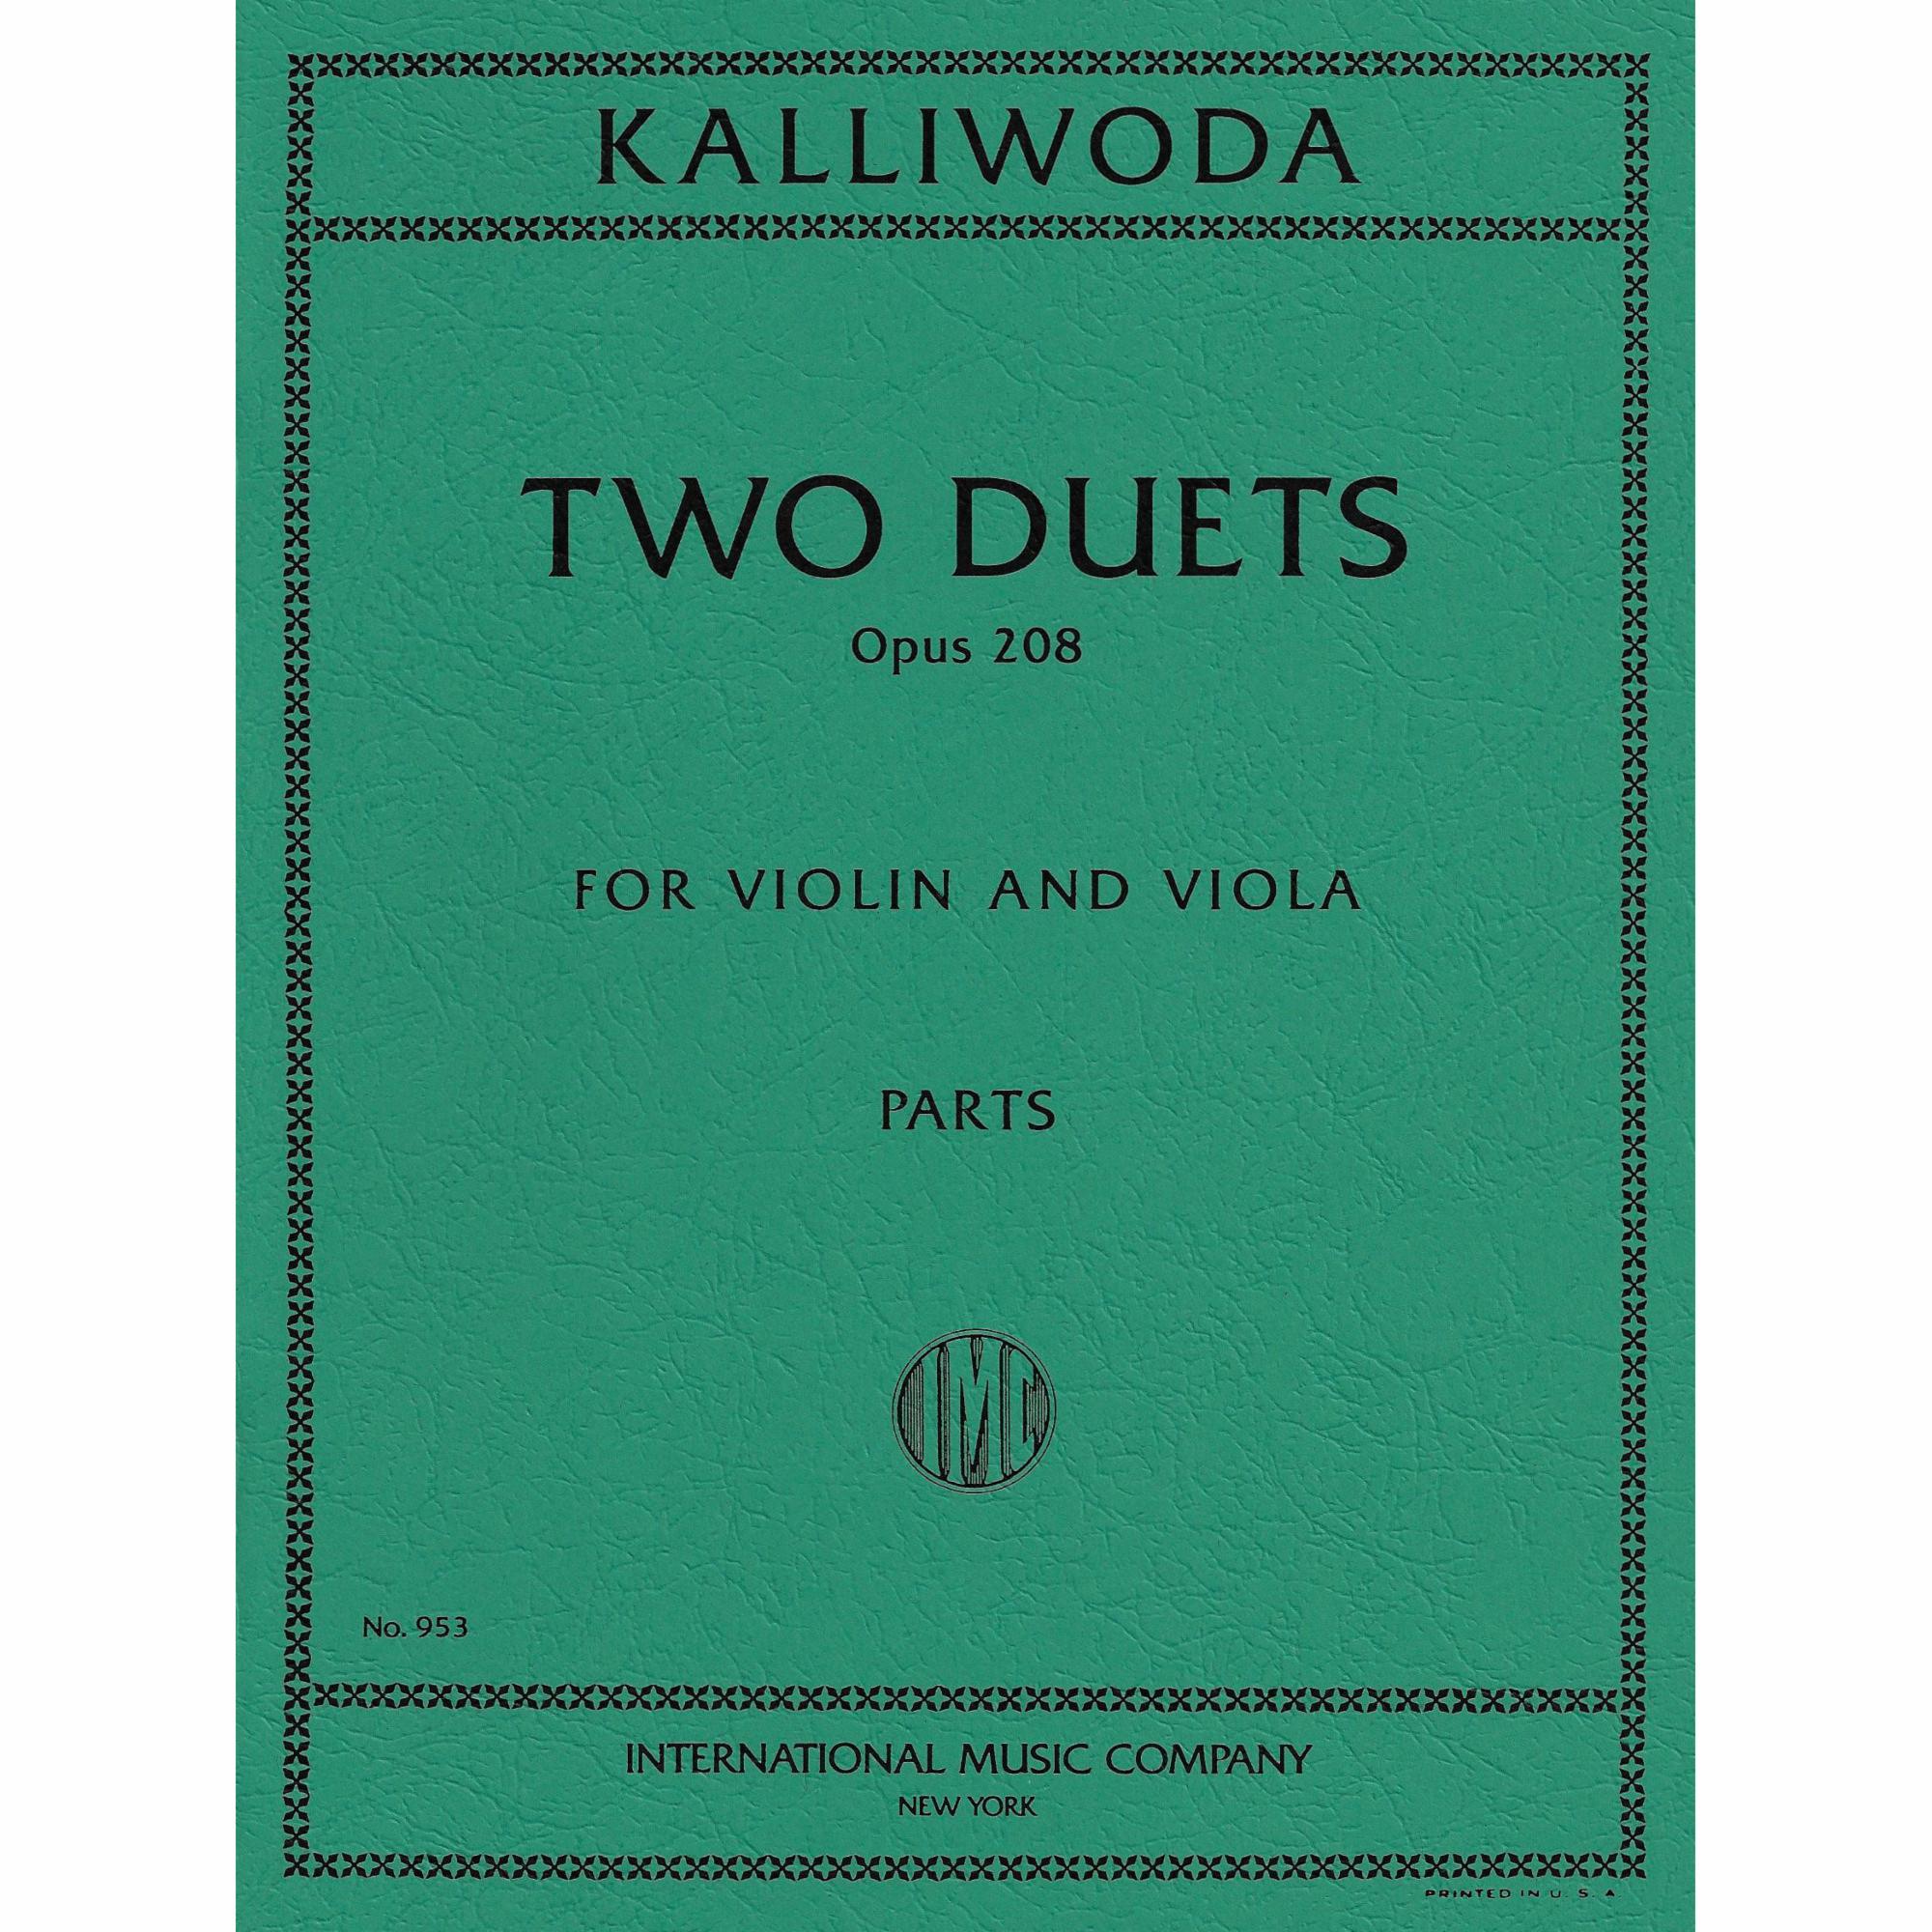 Kalliwoda -- Two Duets, Op. 208 for Violin and Viola